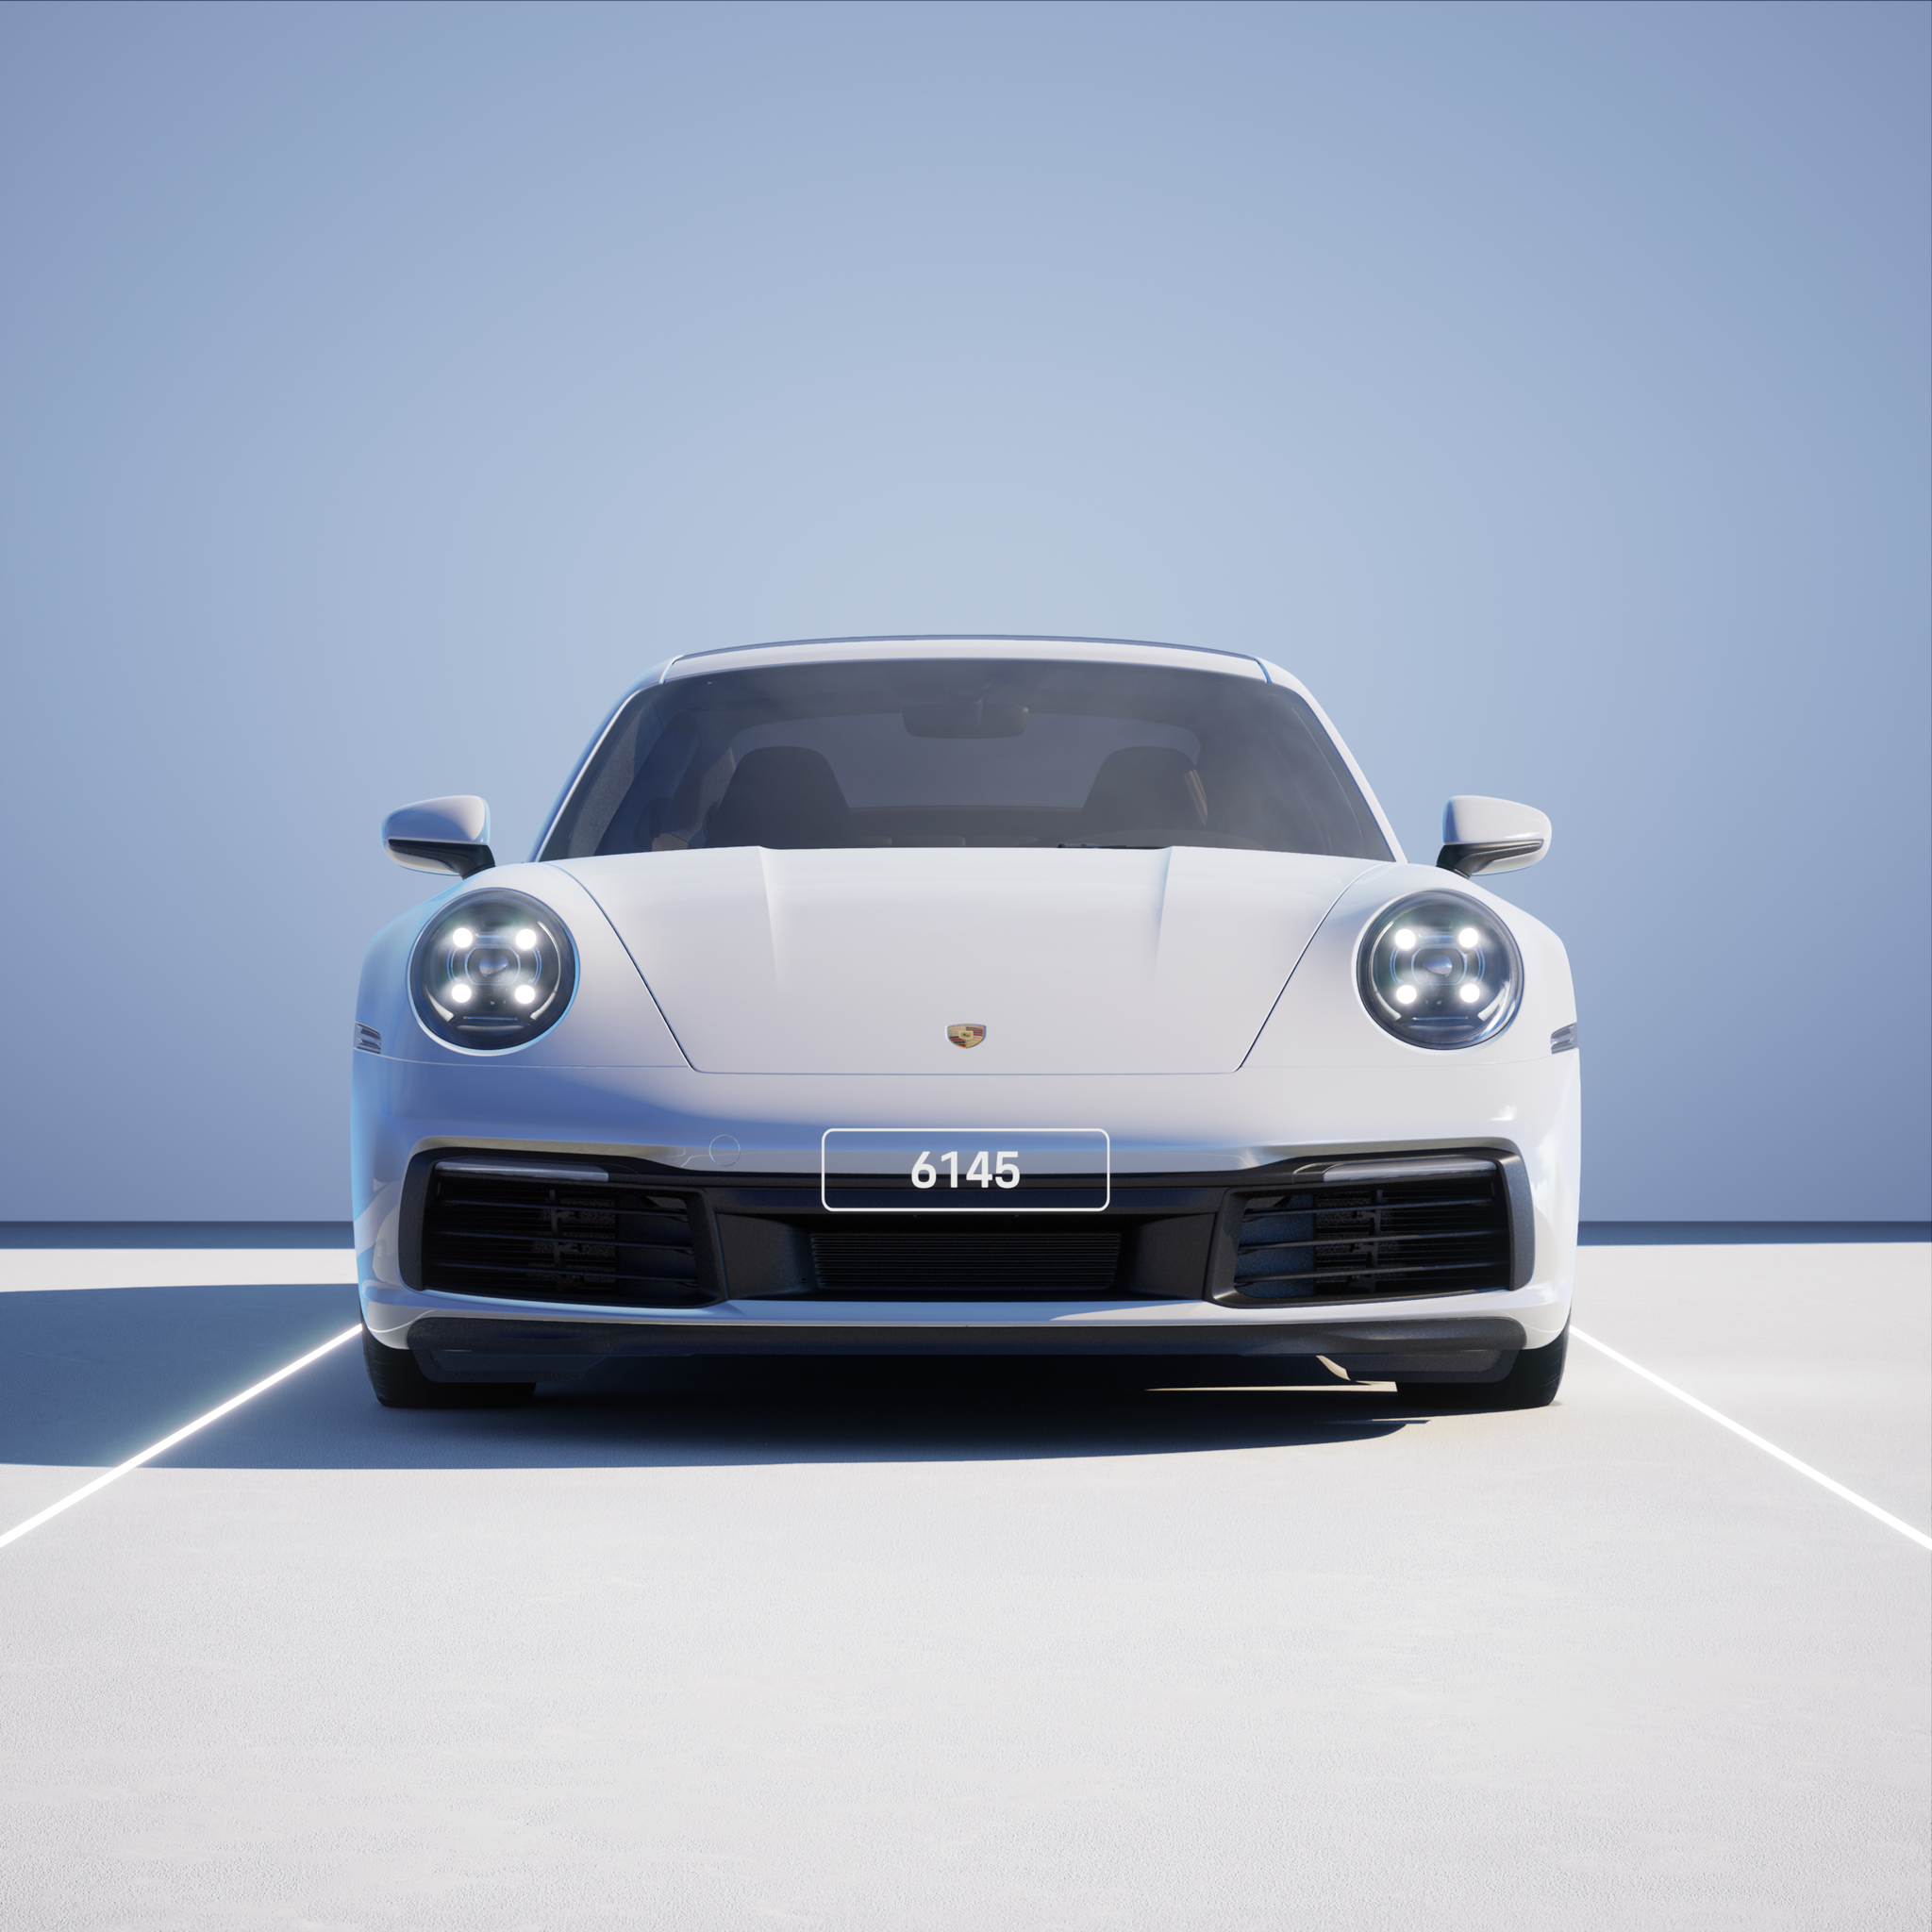 The PORSCHΞ 911 6145 image in phase